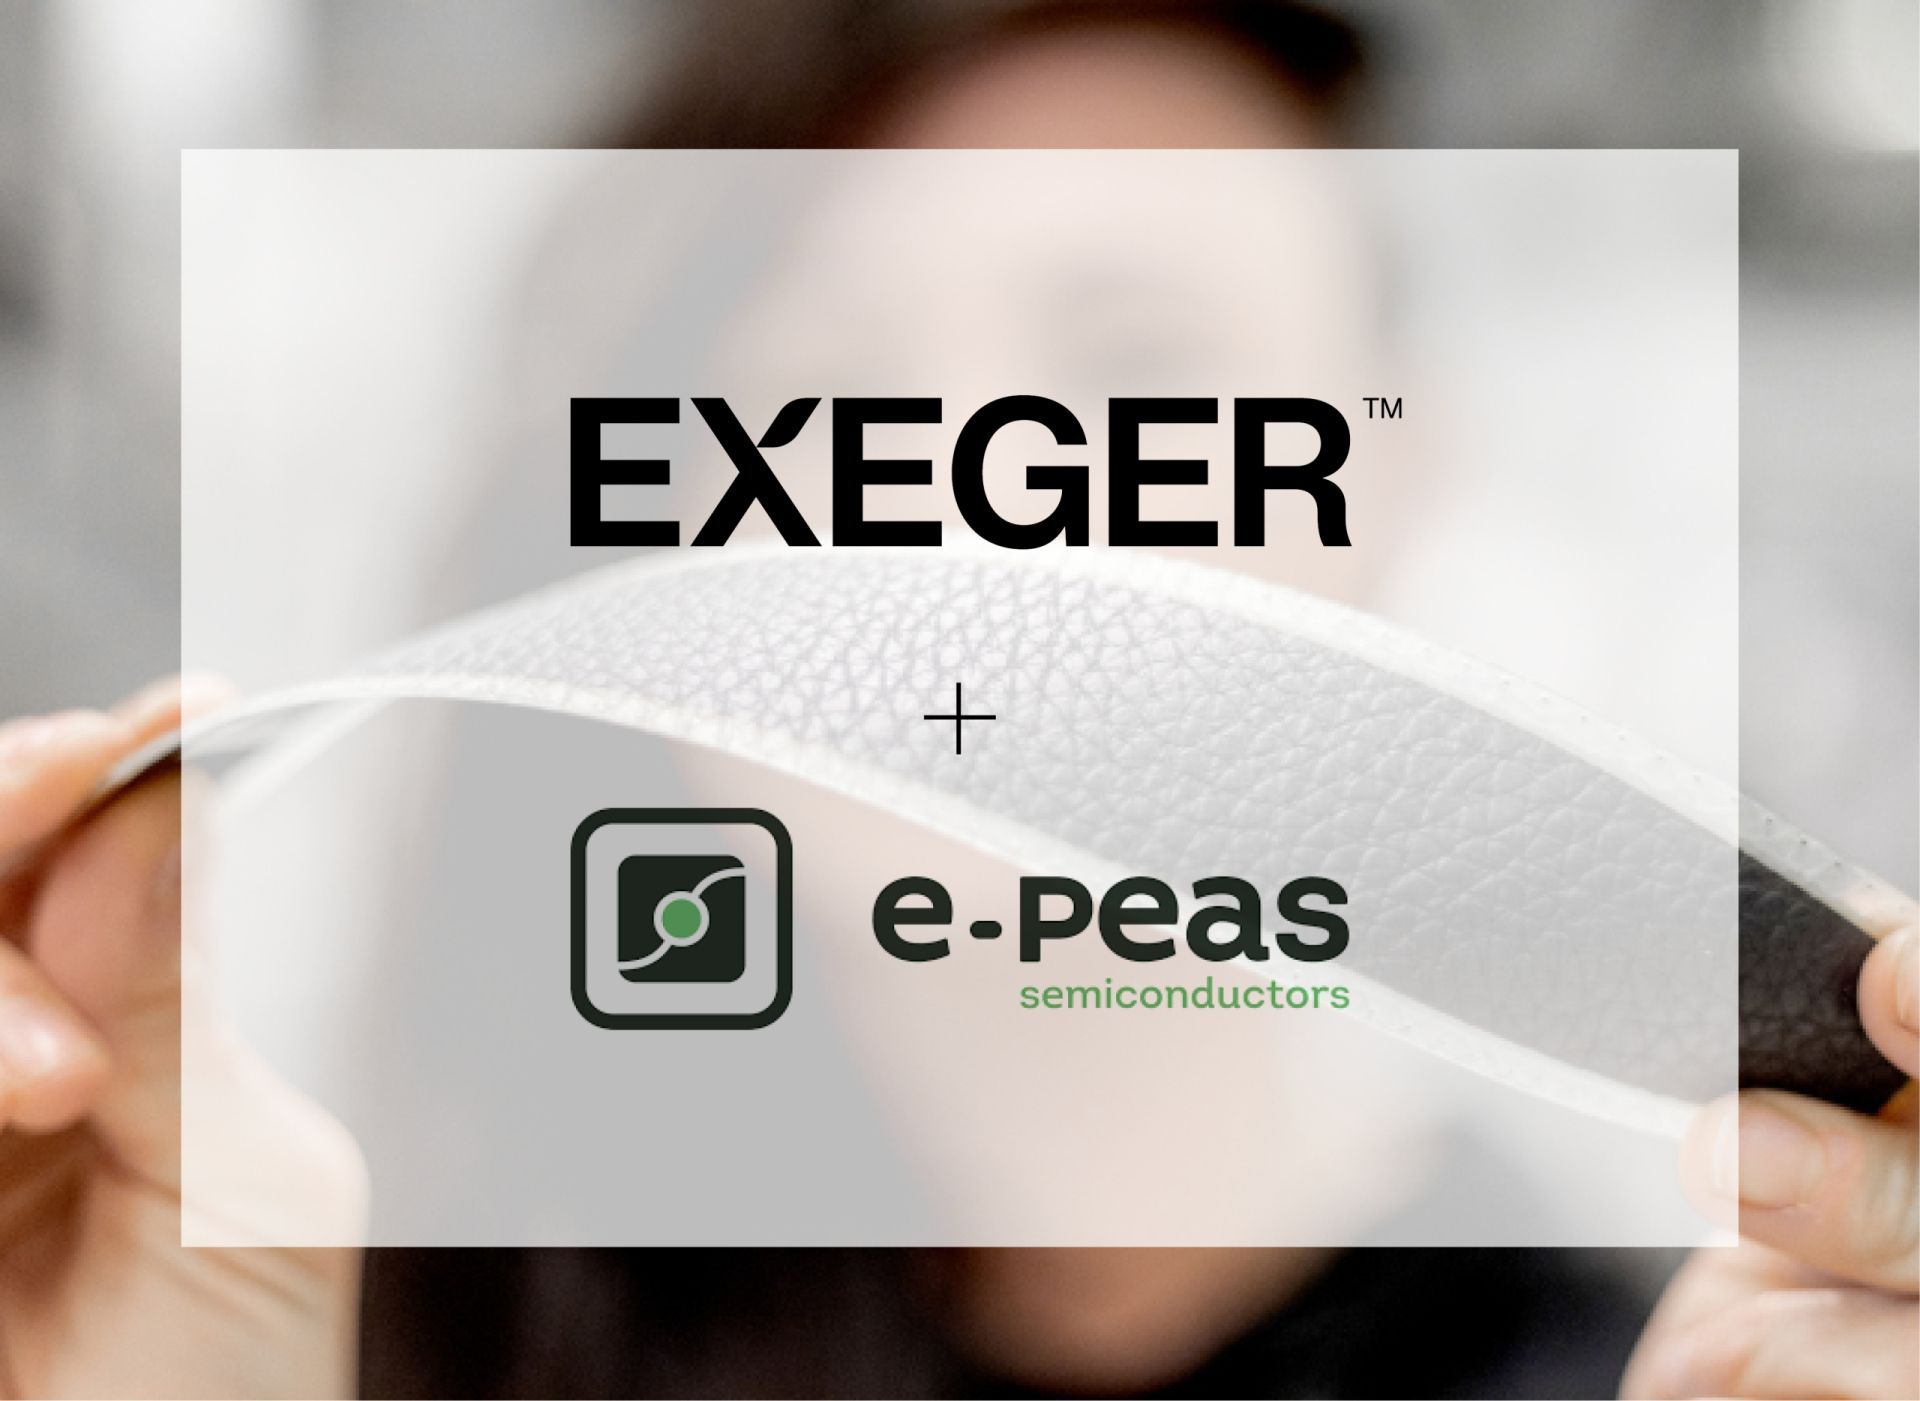 flexible solar cell with exeger and e-peas semiconductors logos